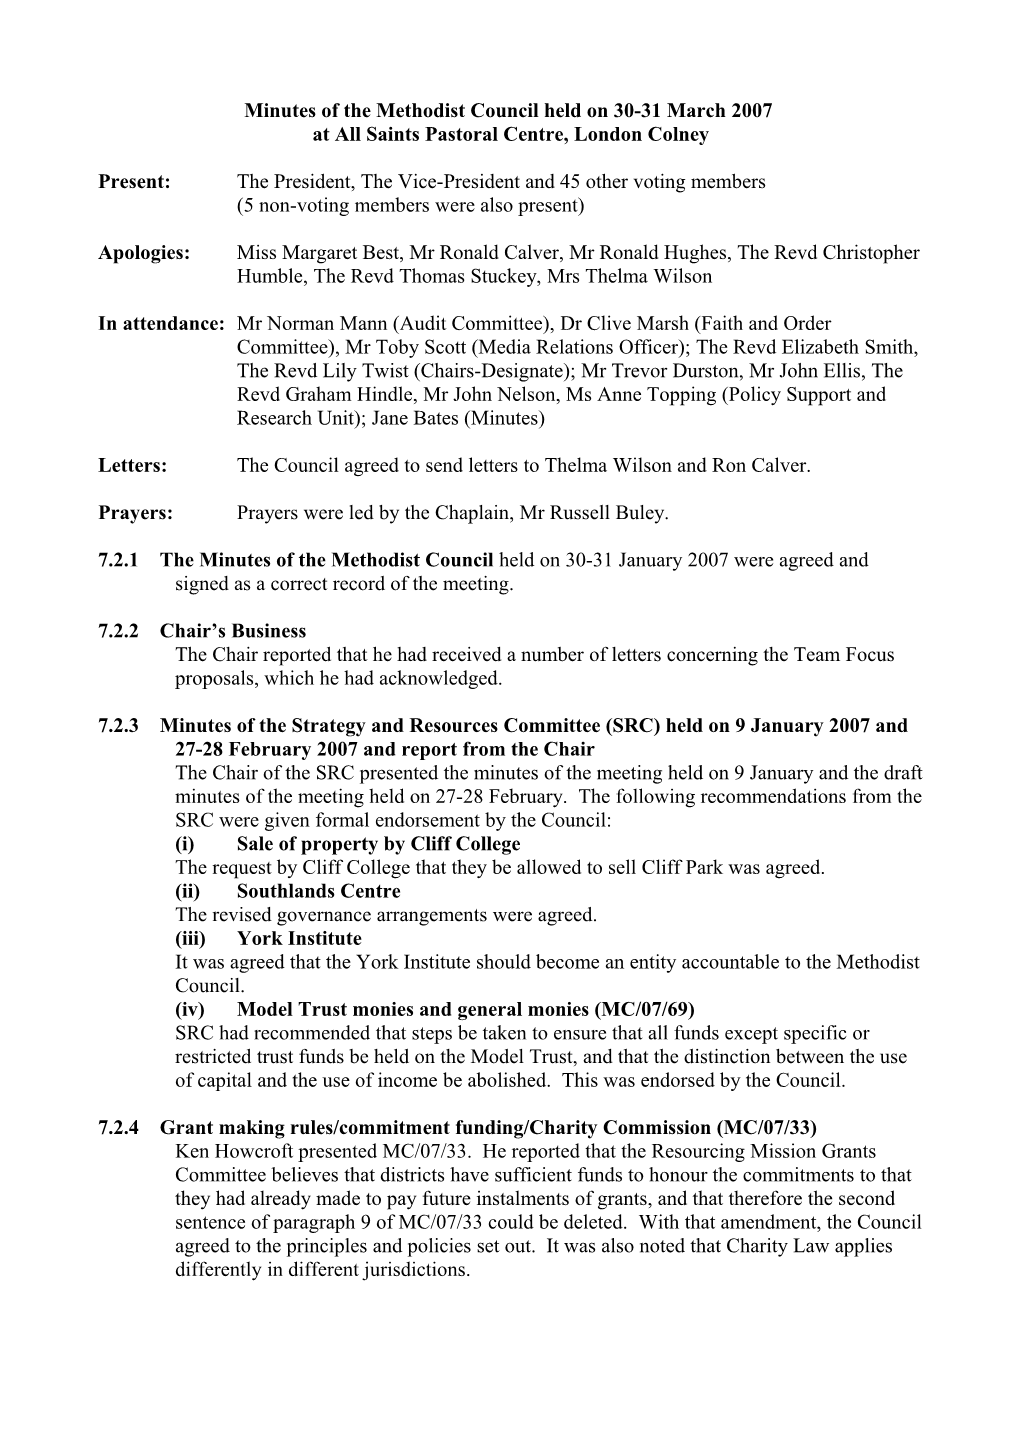 Minutes of the Methodist Council Held on 30-31 March 2007